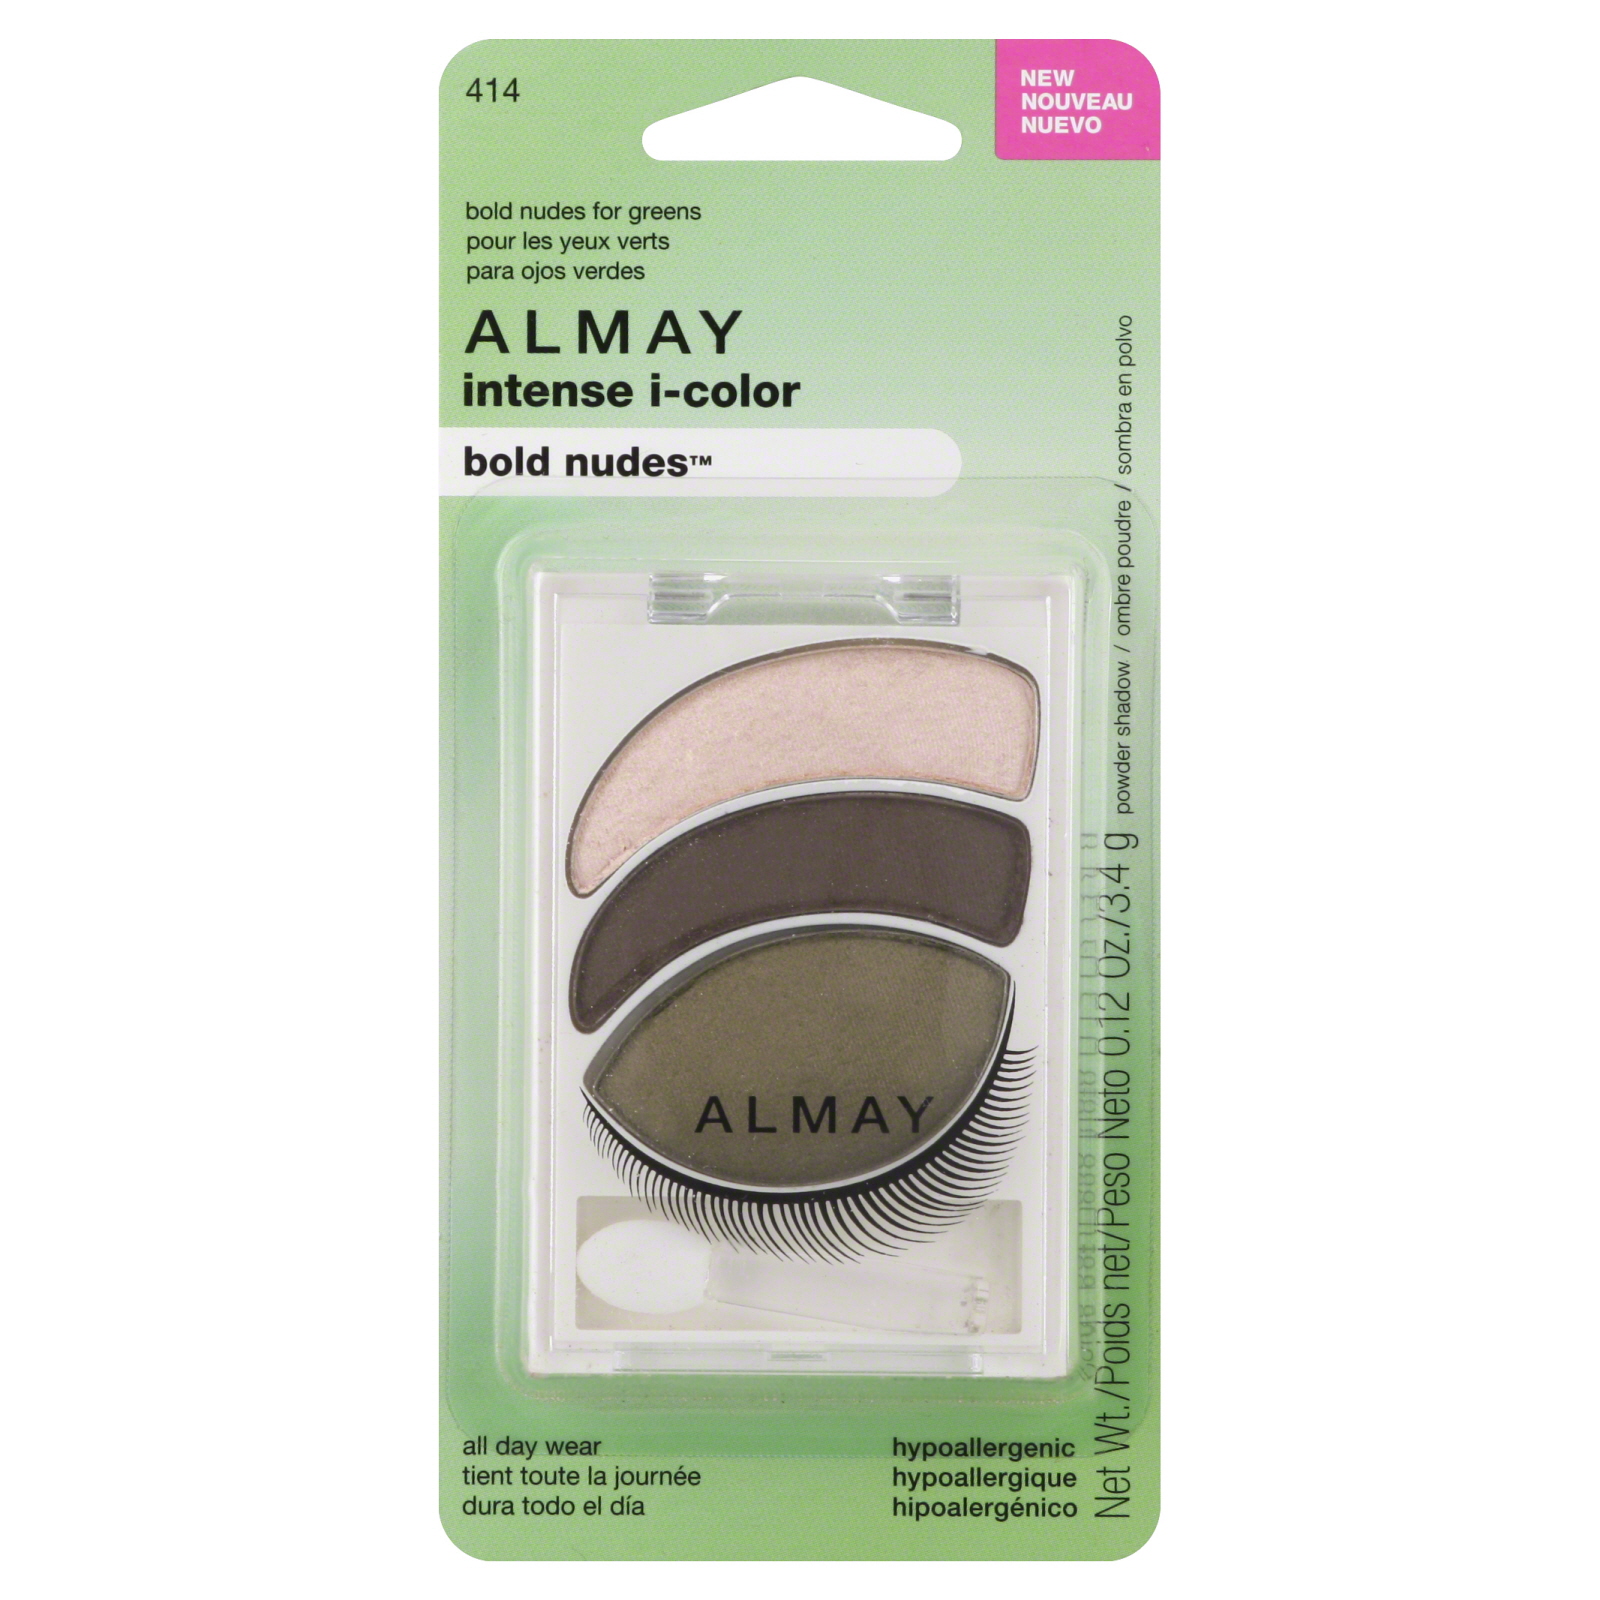 Almay Intense I-Color Bold Nudes Eyeshadow For Green Eyes 0.12 oz